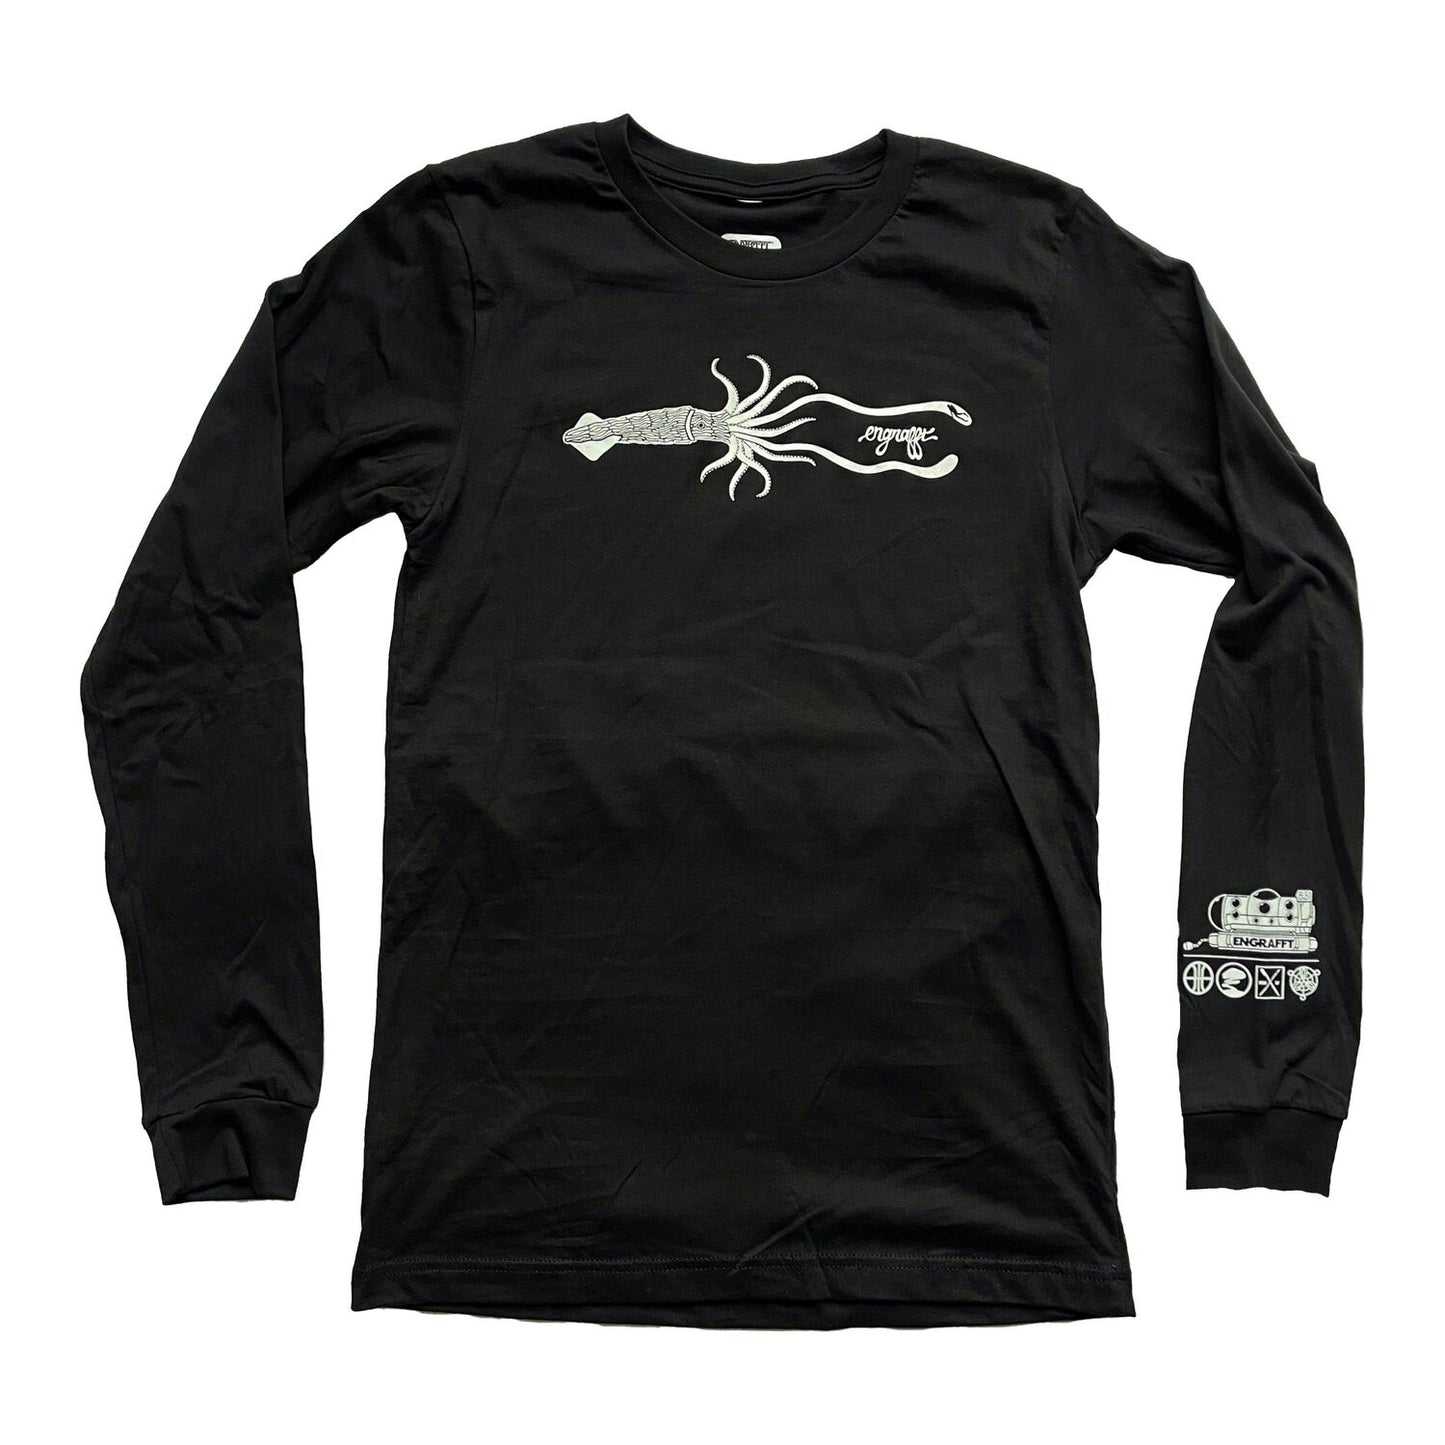 ENGRAFFT - The Giant Squid L/S Tee